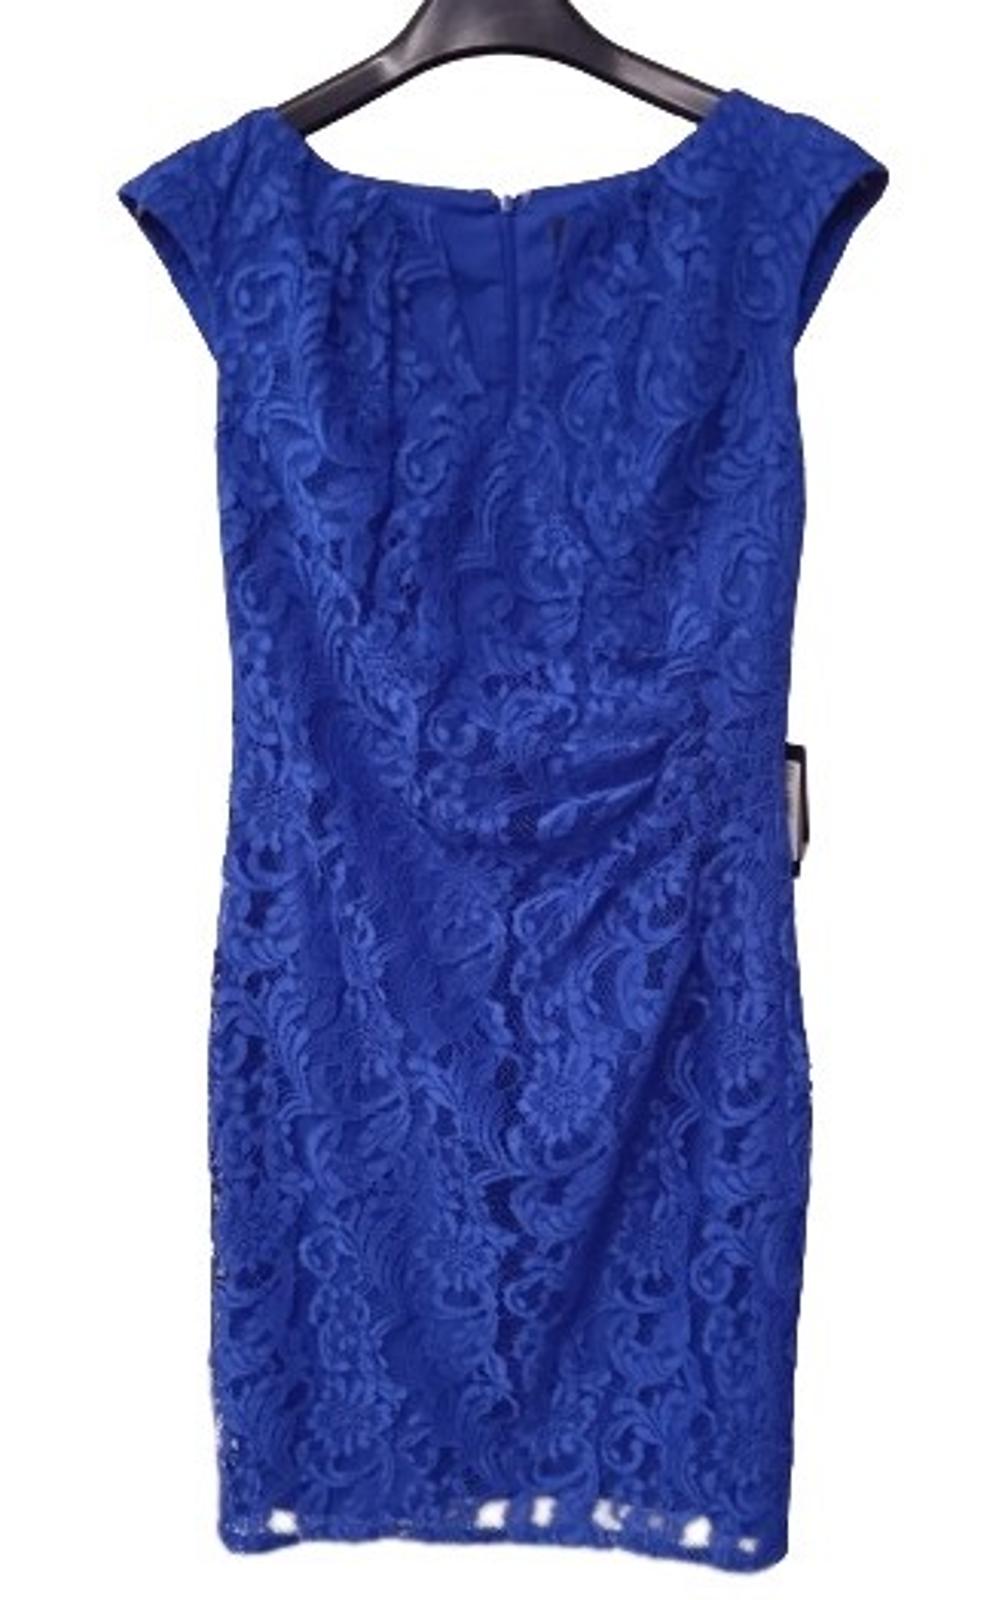 ADRIANNA PAPELL Ladies Navy Blue Lace Pleated Sheath Dress Size UK10 NEW